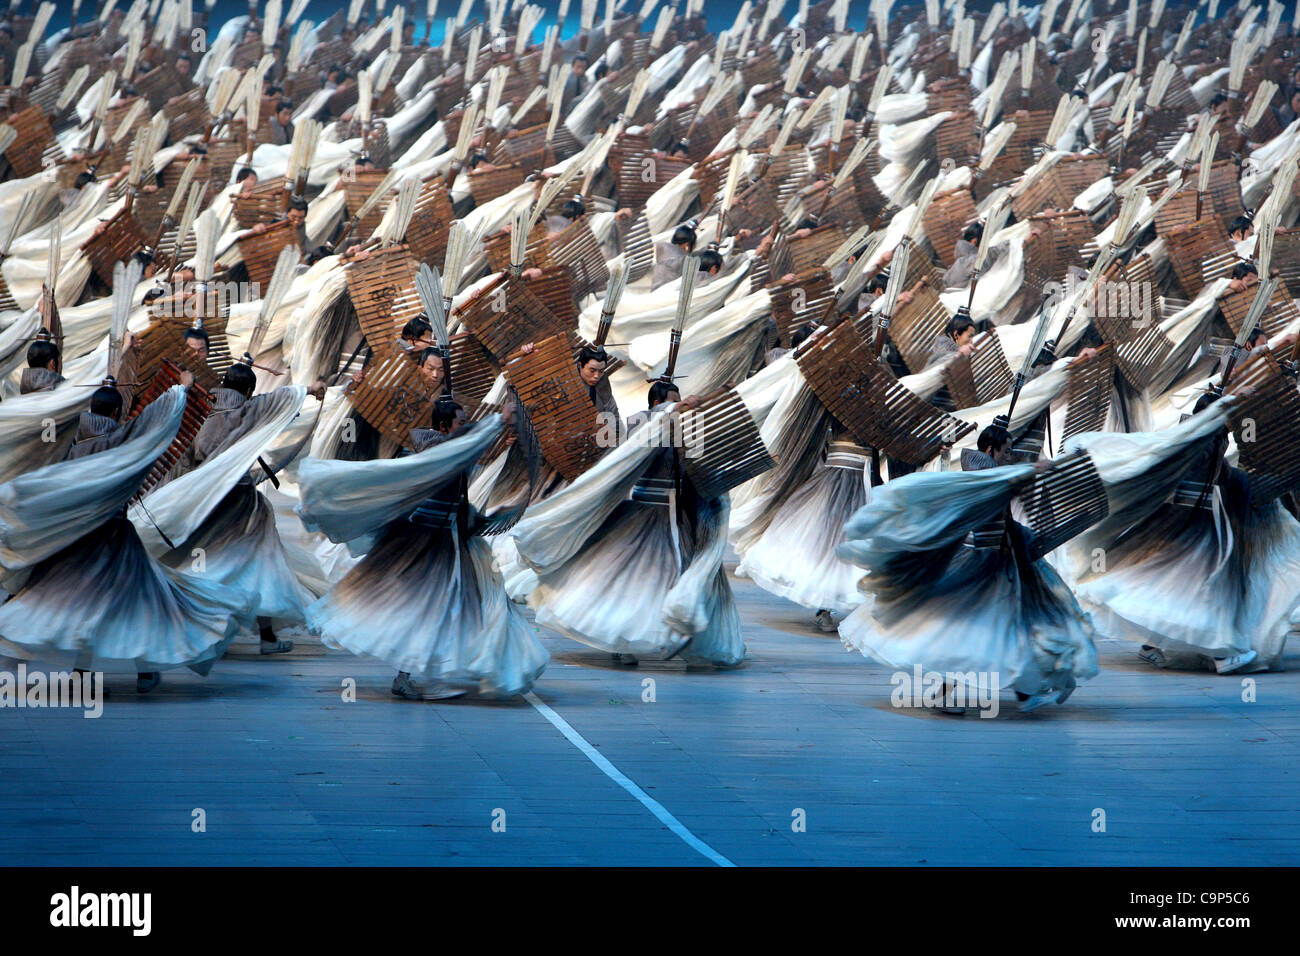 AUGUST 8, 2008 - Opening Ceremony : Artists perform during the opening ceremony for the 2008 Beijing Summer Olympics at the National Stadium on August 8, 2008 in Beijing, China. (Photo by Koji Aoki/AFLO SPORT) [0008] Stock Photo